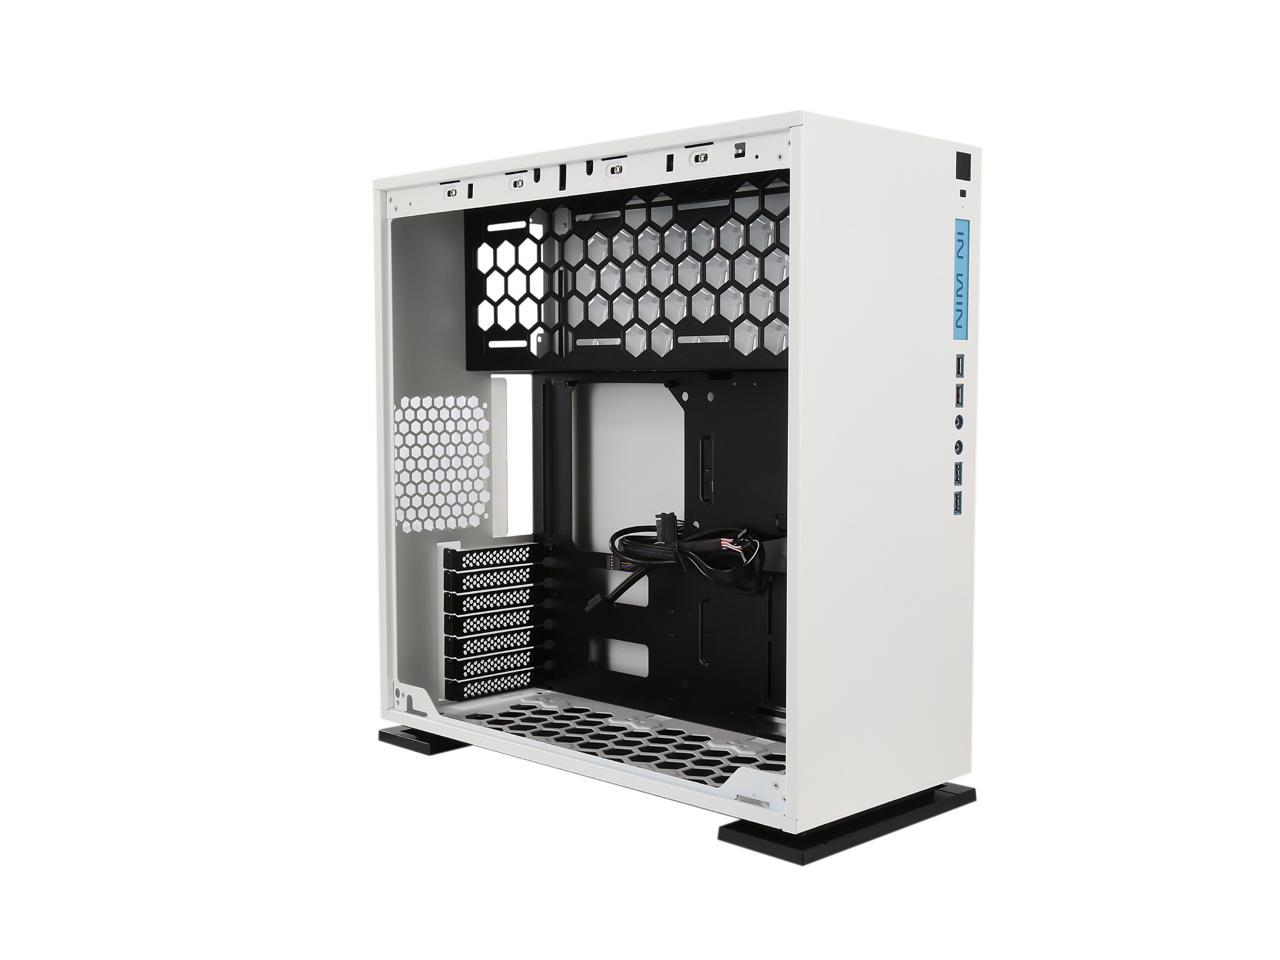 In Win 303 White Secc Steel Tempered Glass Case Atx Mid Tower Dual Chambered High Air Flow Newegg Com